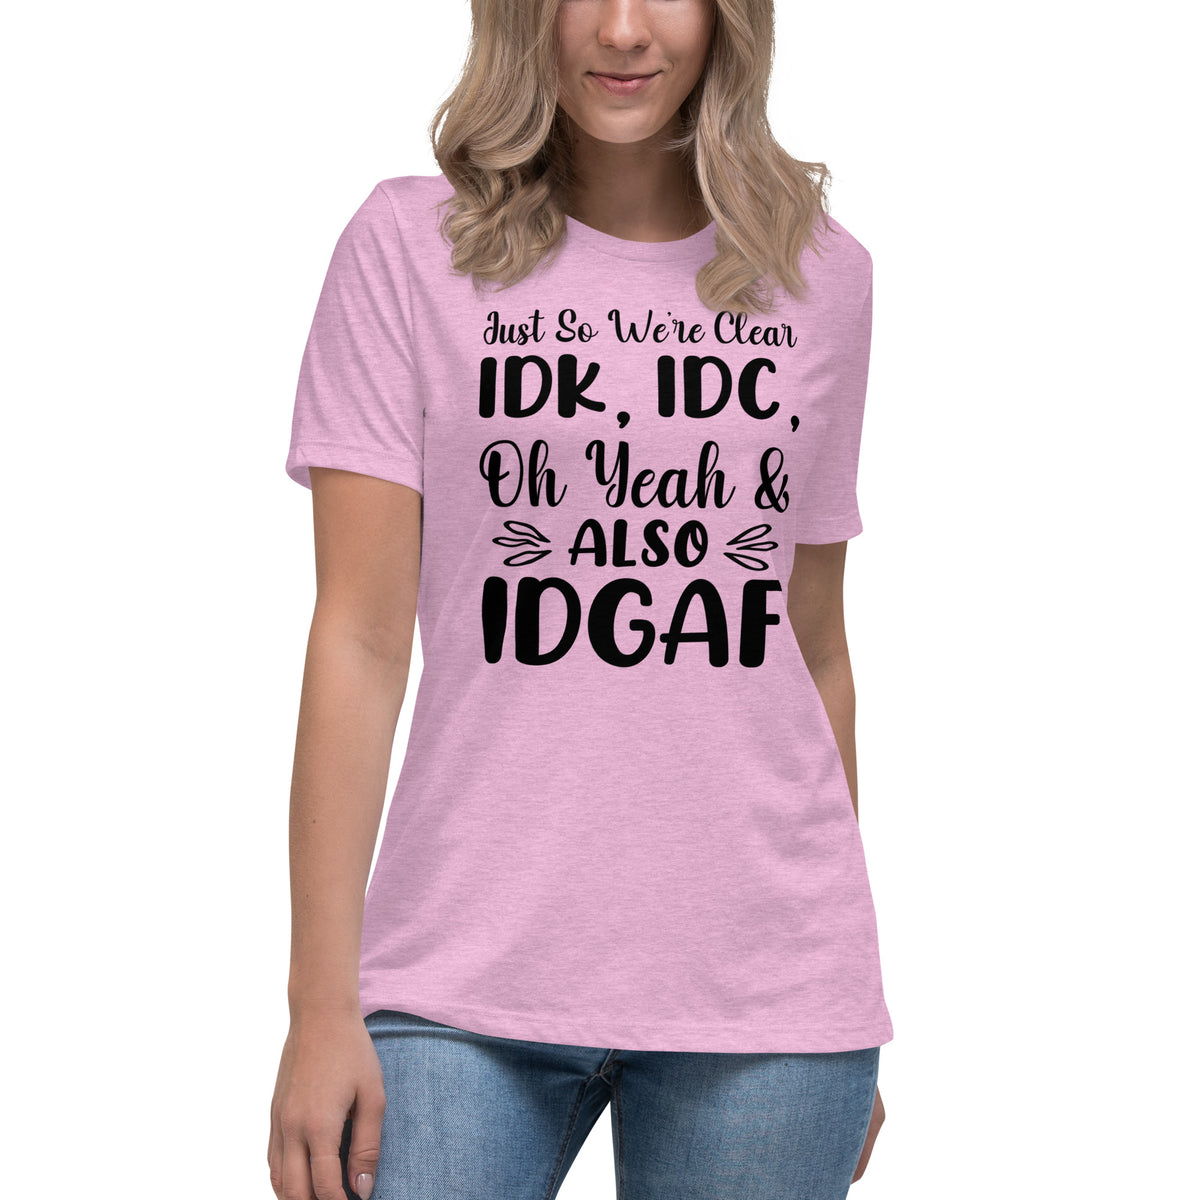 I Don't Know, I Don't Care and IDGAF Women's Relaxed T-Shirt